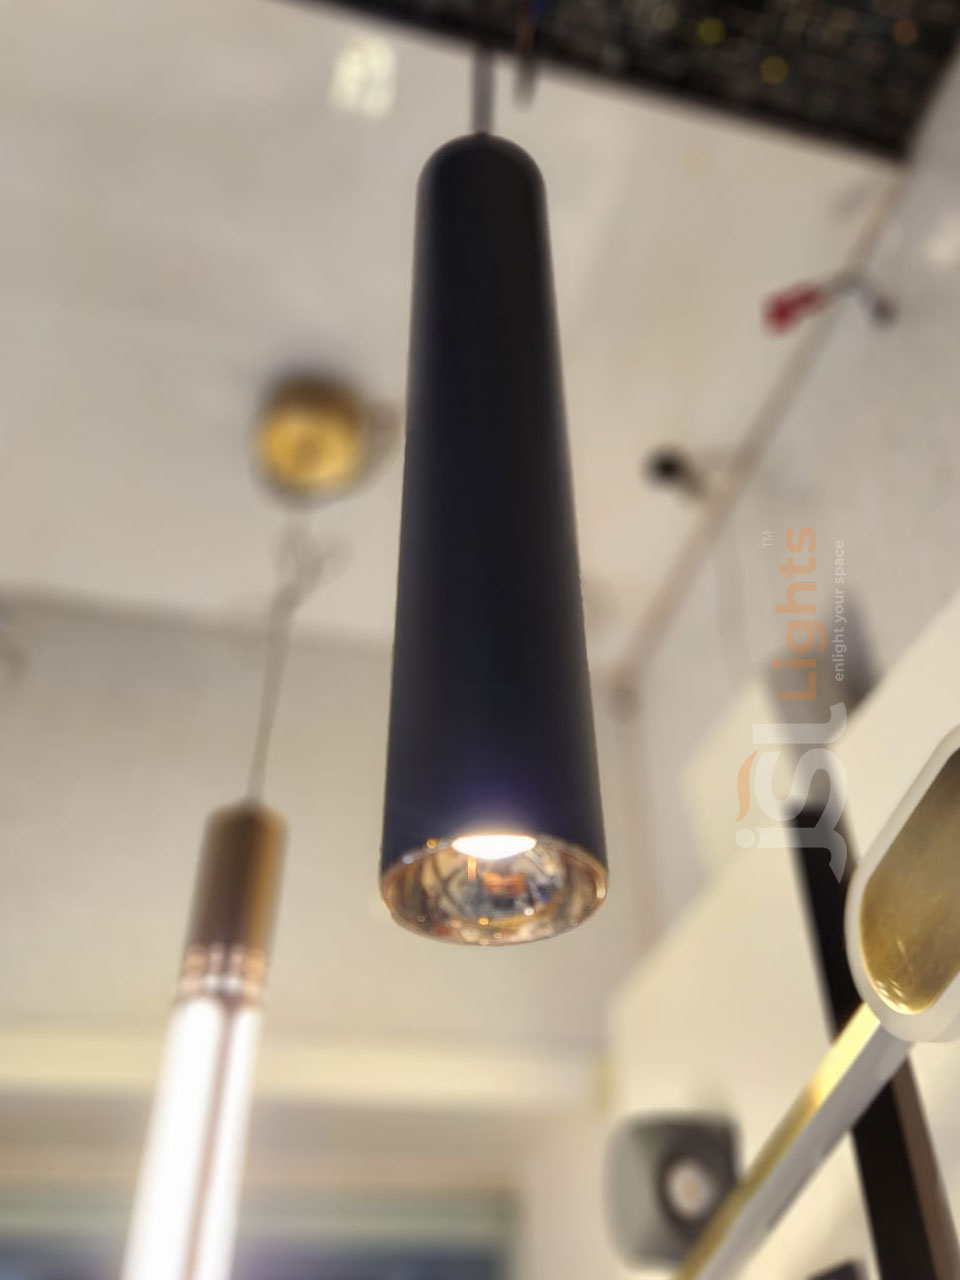 6W LX 0205 Black Body Hanging Lights for Home Ceiling Pendant Light with RoseGold Reflector and 3000K LED Color